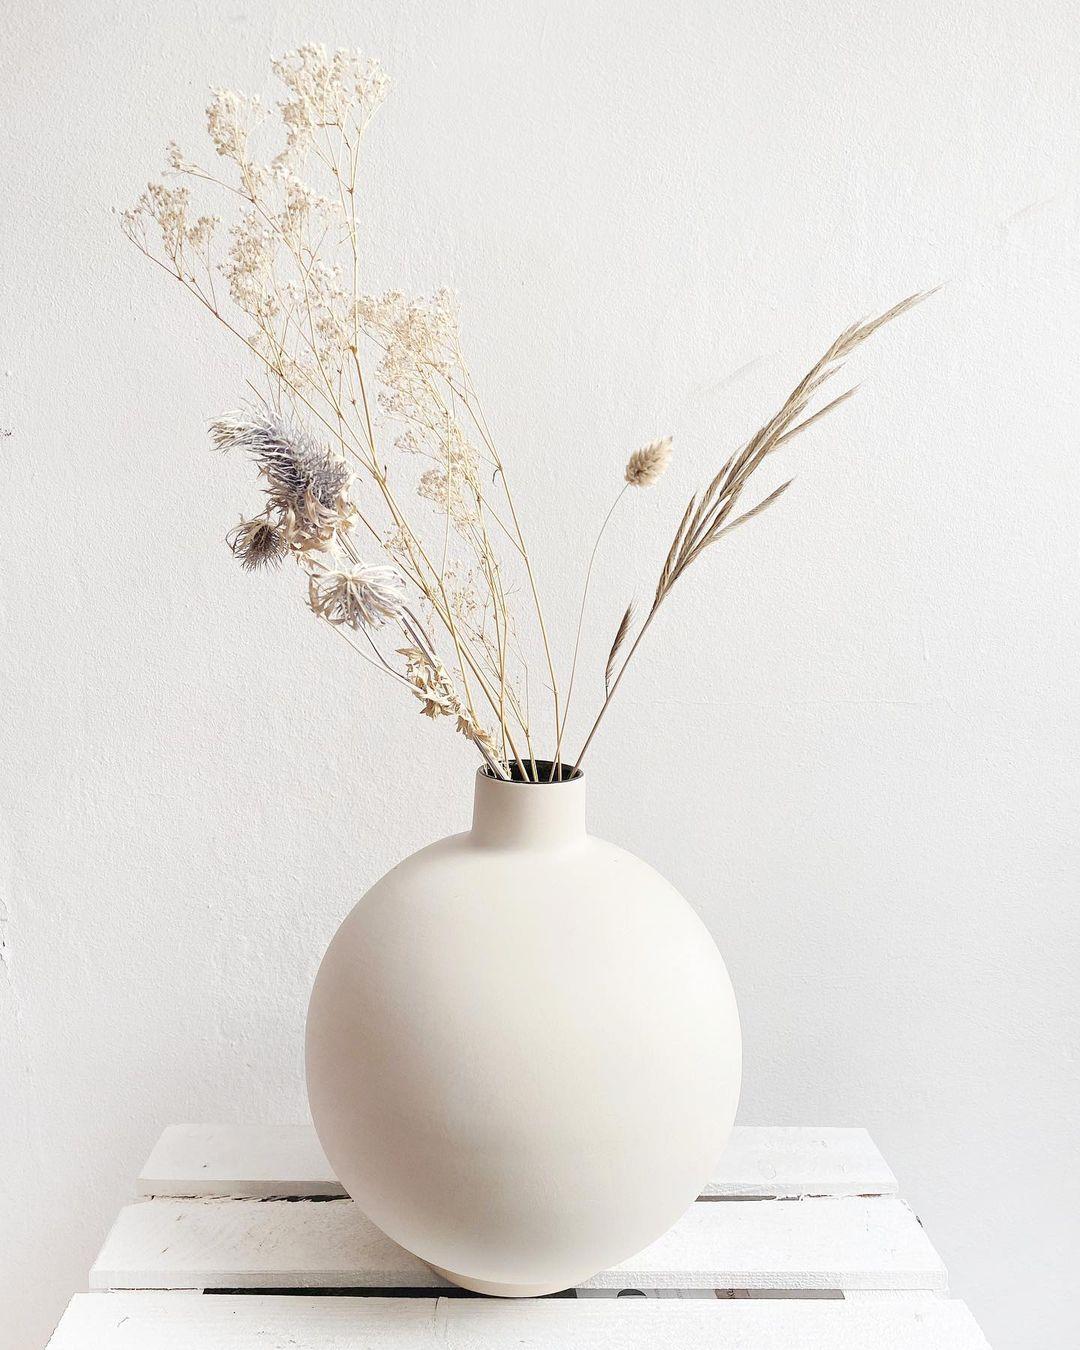 Irena black vase by Malwina Konopacka.
Materials: Ceramic.
Dimensions: ø 20 x 25 cm.

Comes in a simple and compact spherical shape topped by a stout cylindrical neck. Made from non-refractory ceramics it offers great opportunities to exhibit